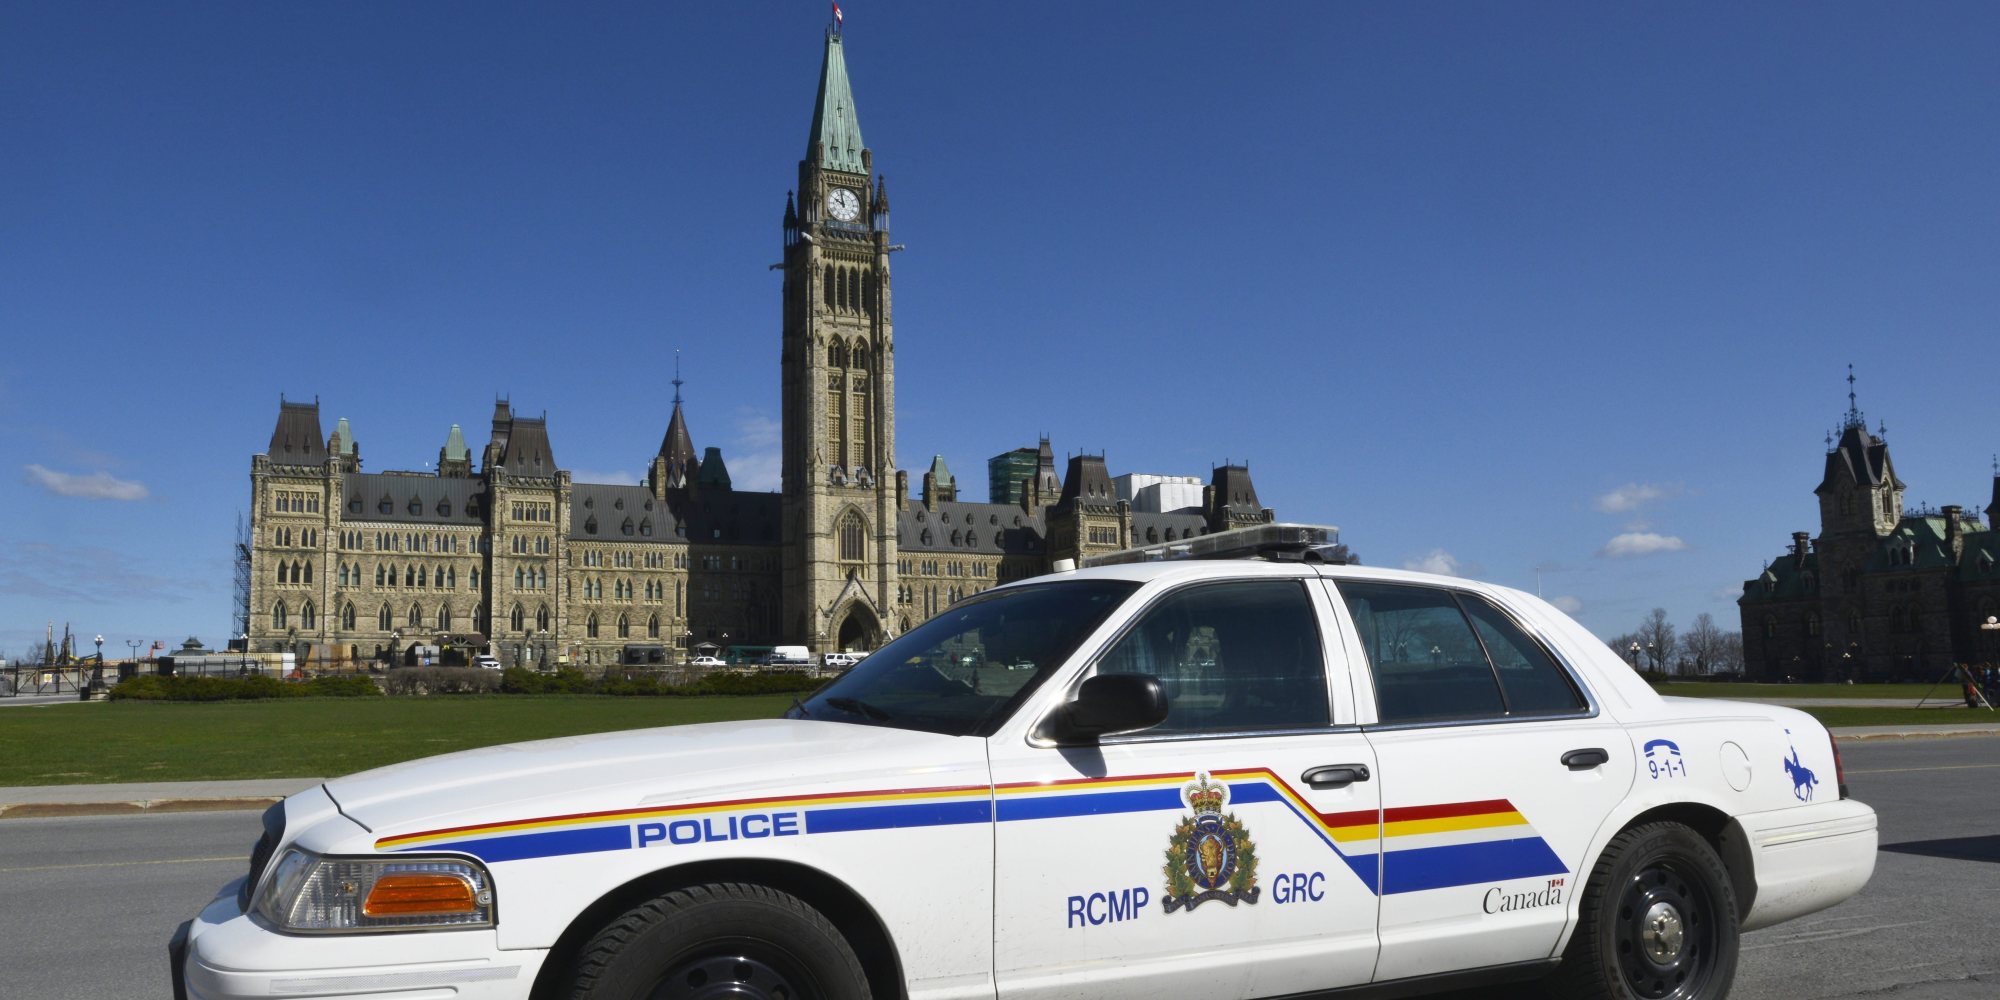 A RCMP cruiser sits parked on Parliament Hill in Ottawa on Tuesday, April 28, 2015. THE CANADIAN PRESS IMAGES/Matthew Usherwood